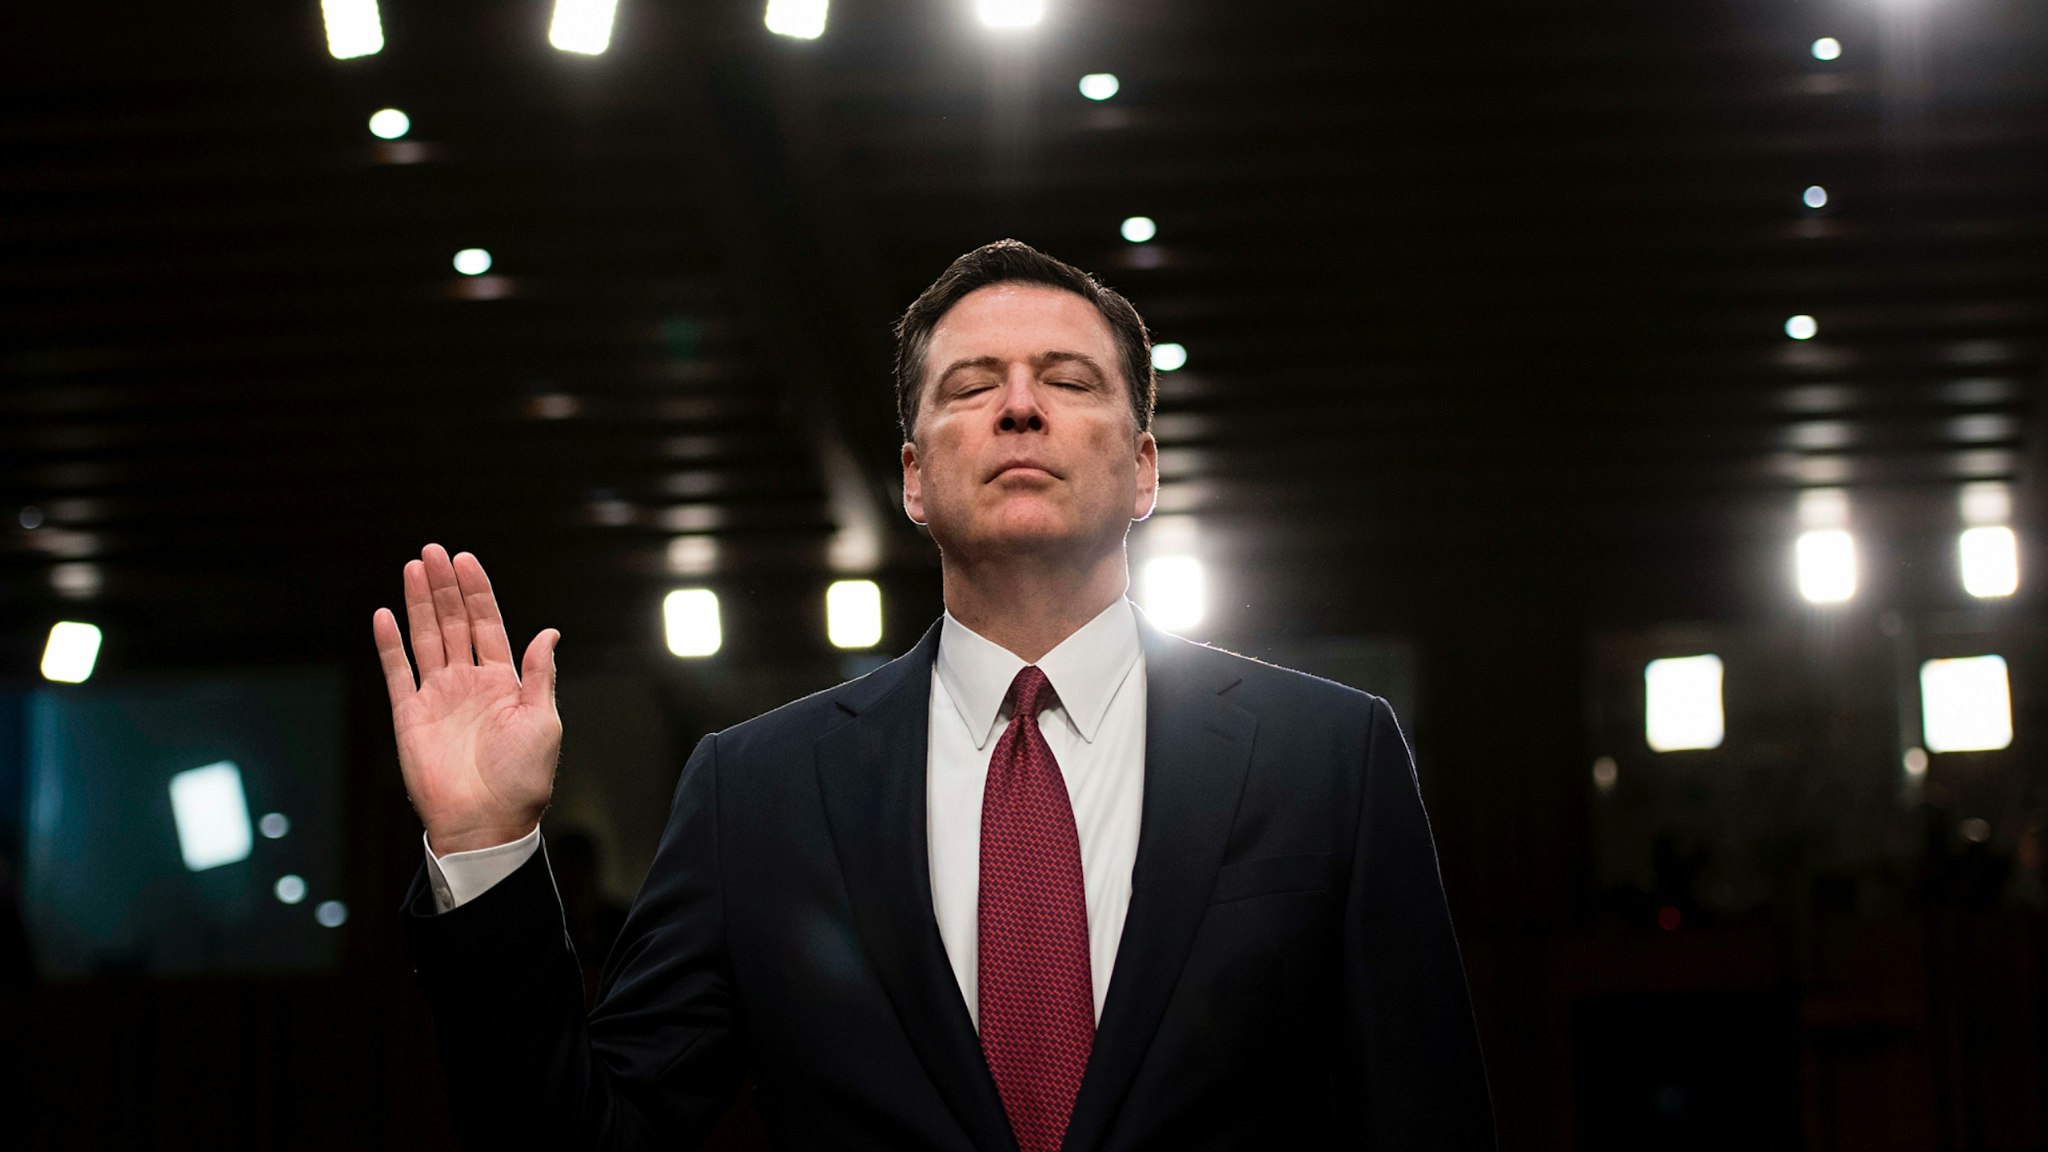 Ousted FBI director James Comey is sworn in during a hearing before the Senate Select Committee on Intelligence on Capitol Hill June 8, 2017 in Washington, DC.